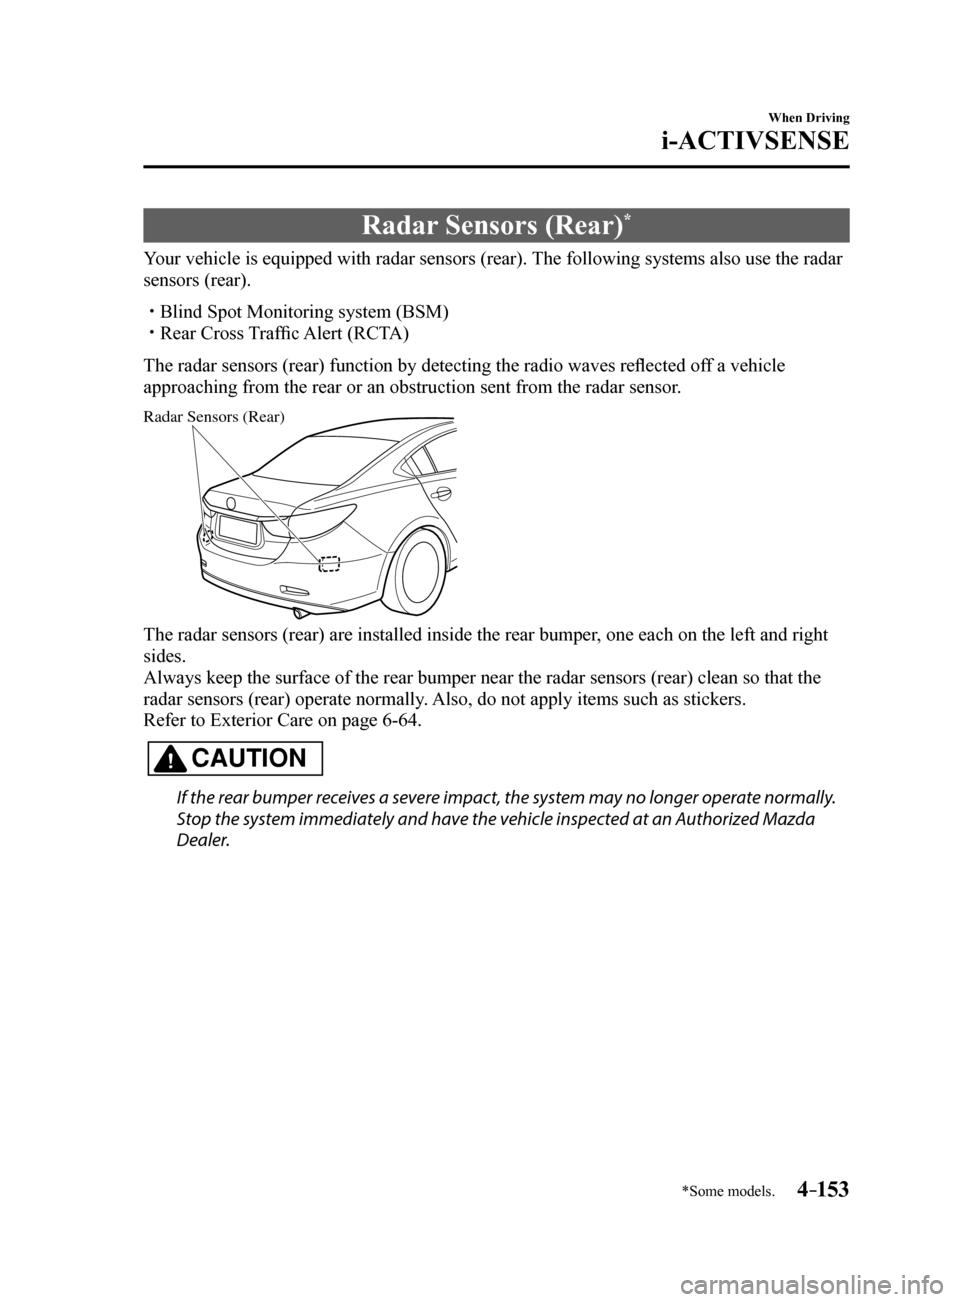 MAZDA MODEL 6 2017   (in English) User Guide 4–153
When Driving
i-ACTIVSENSE
*Some models.
Radar Sensors (Rear)*
Your vehicle is equipped with radar sensors (rear). The following systems also use the radar 
sensors (rear).
 Blind Spot Monit